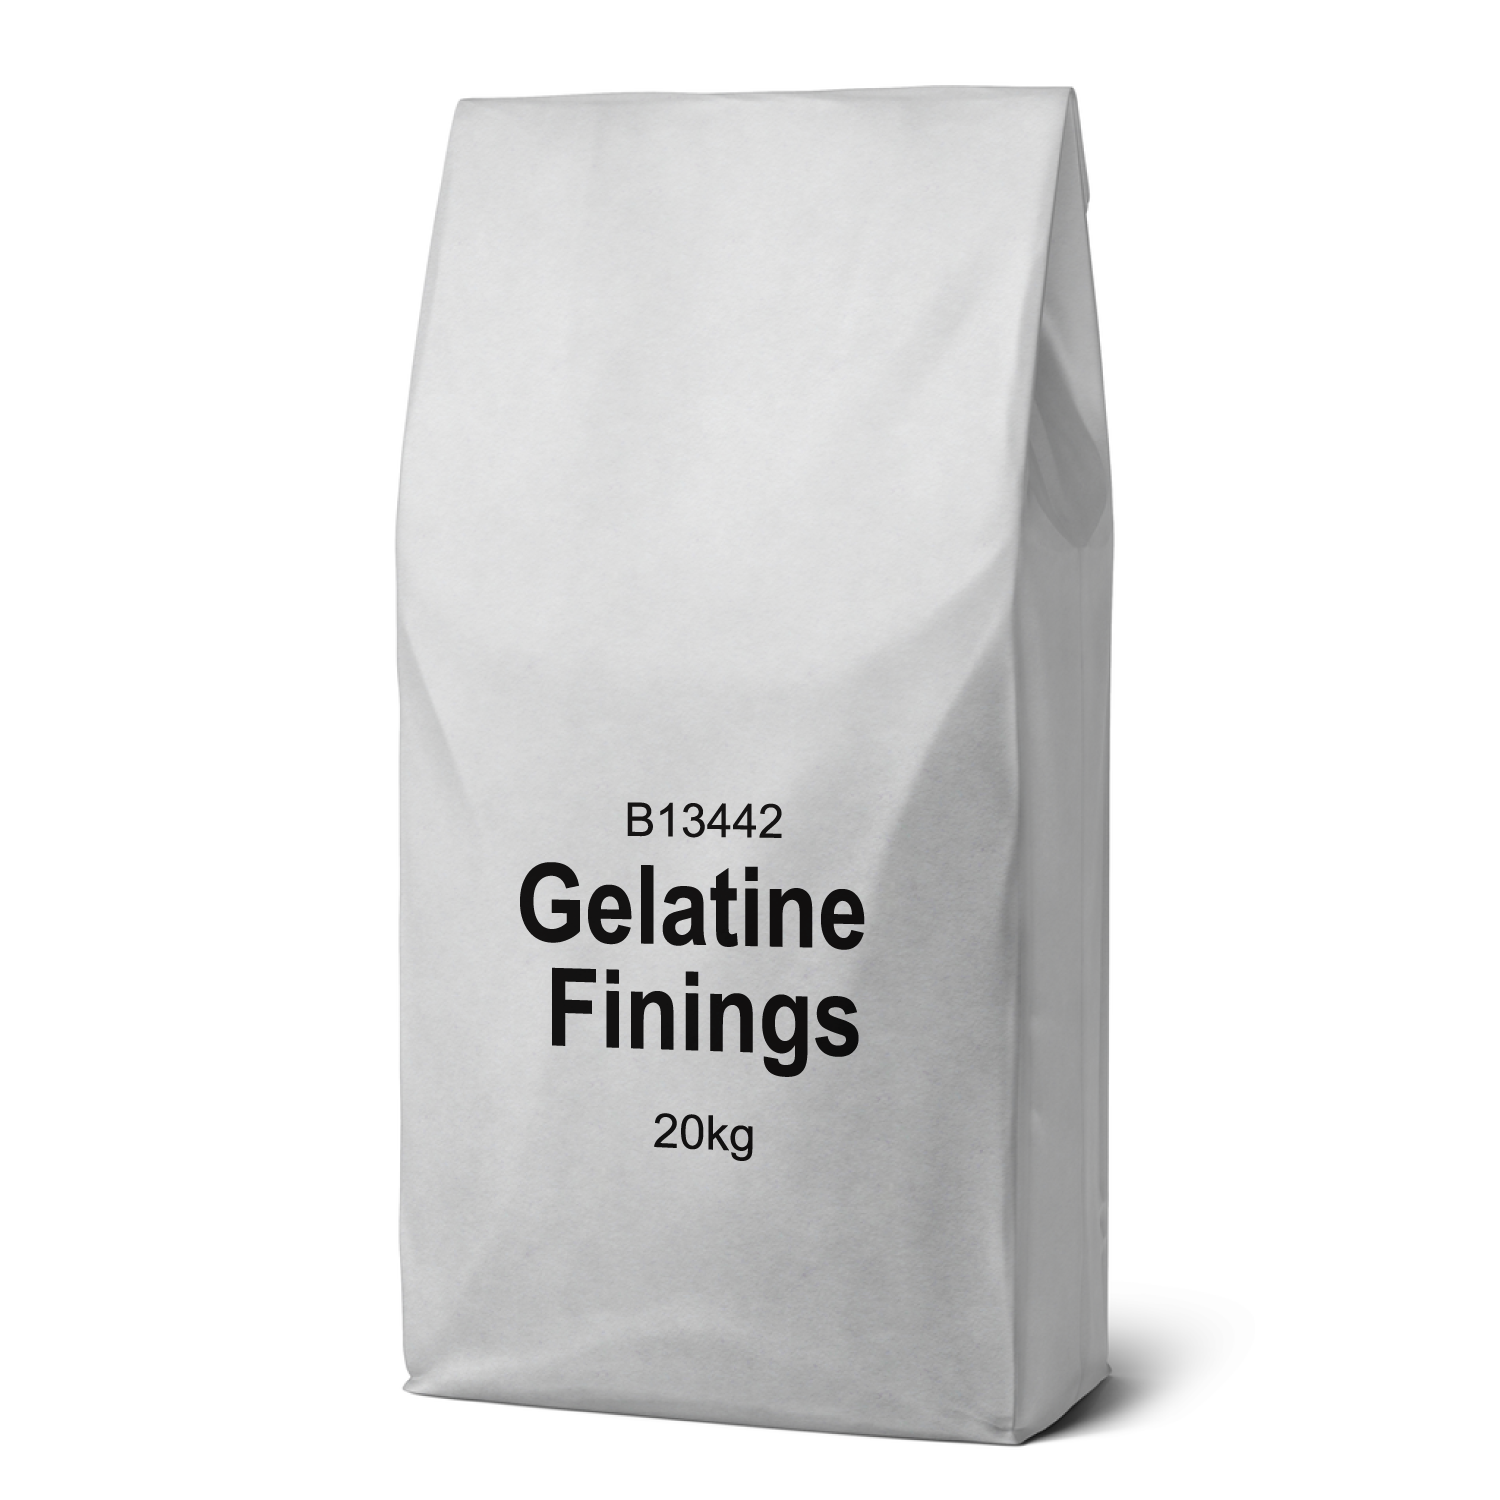 Product image for Gelatine Finings